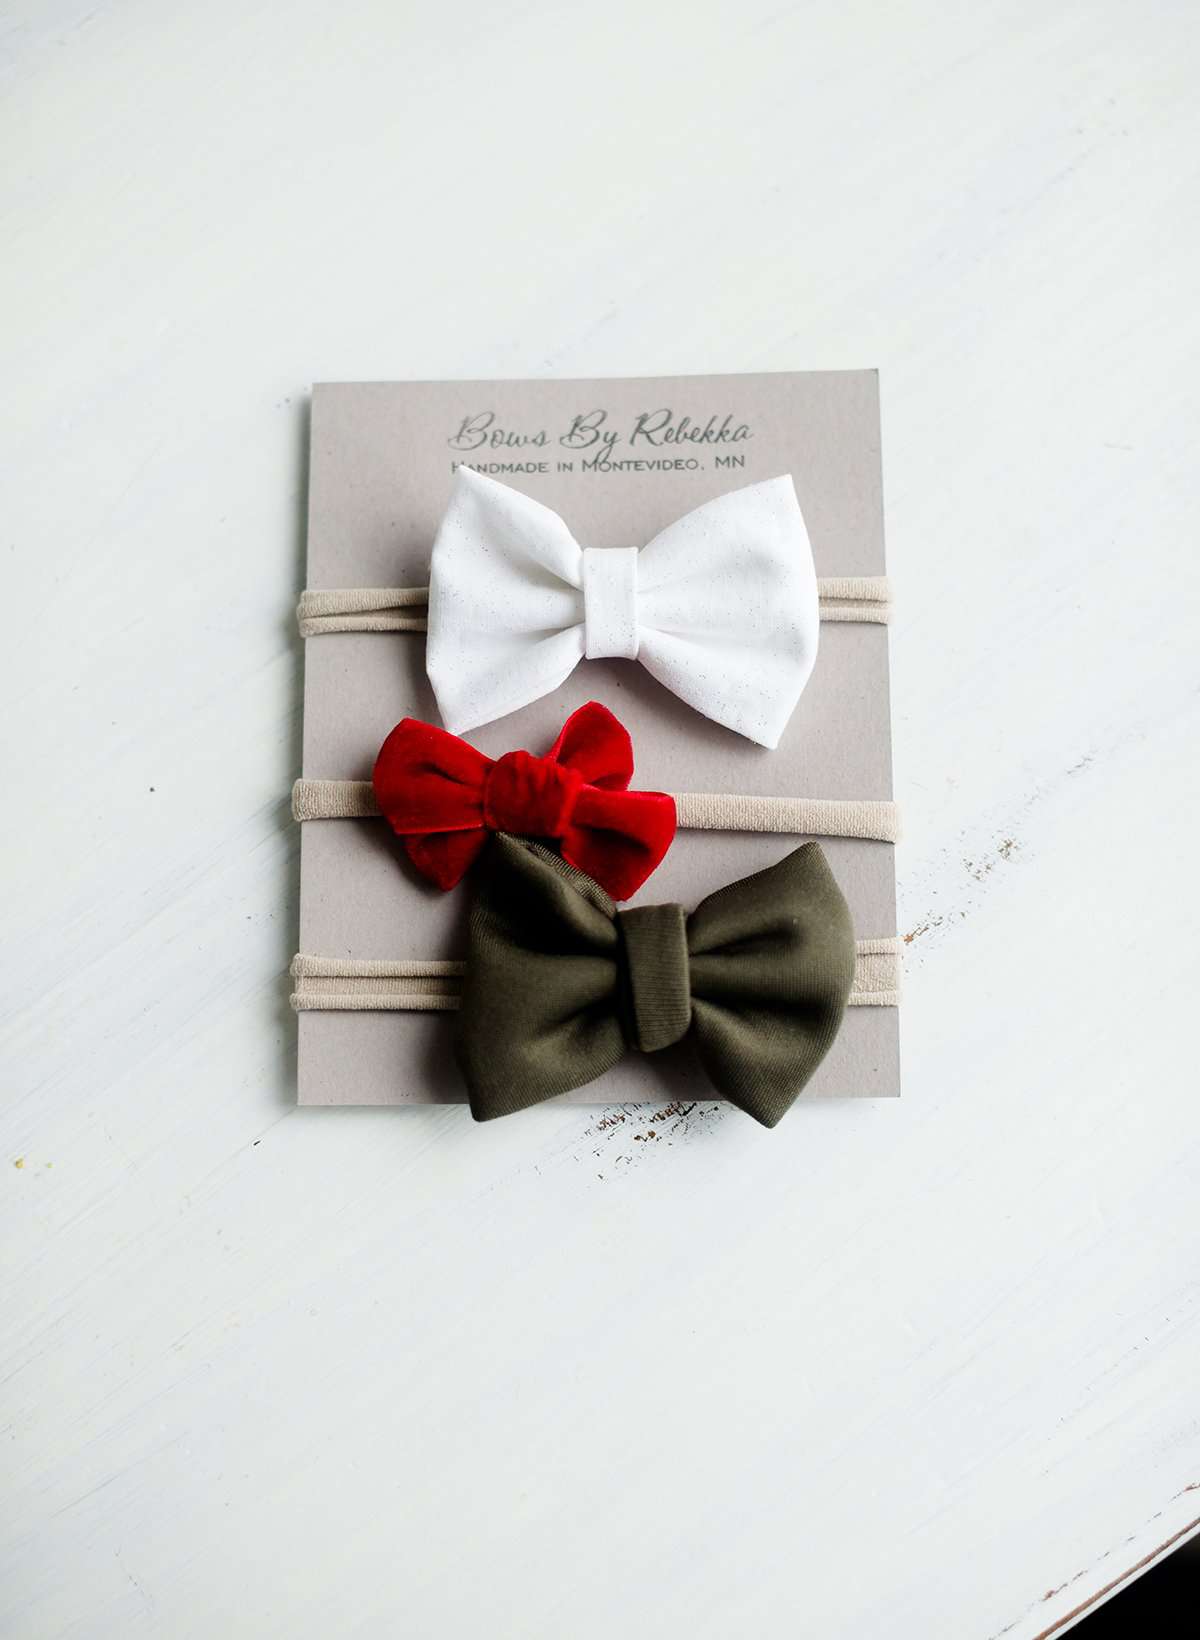 Little girls hair bow set of three. This shows a white, green and red velvet headband on a nylon band.